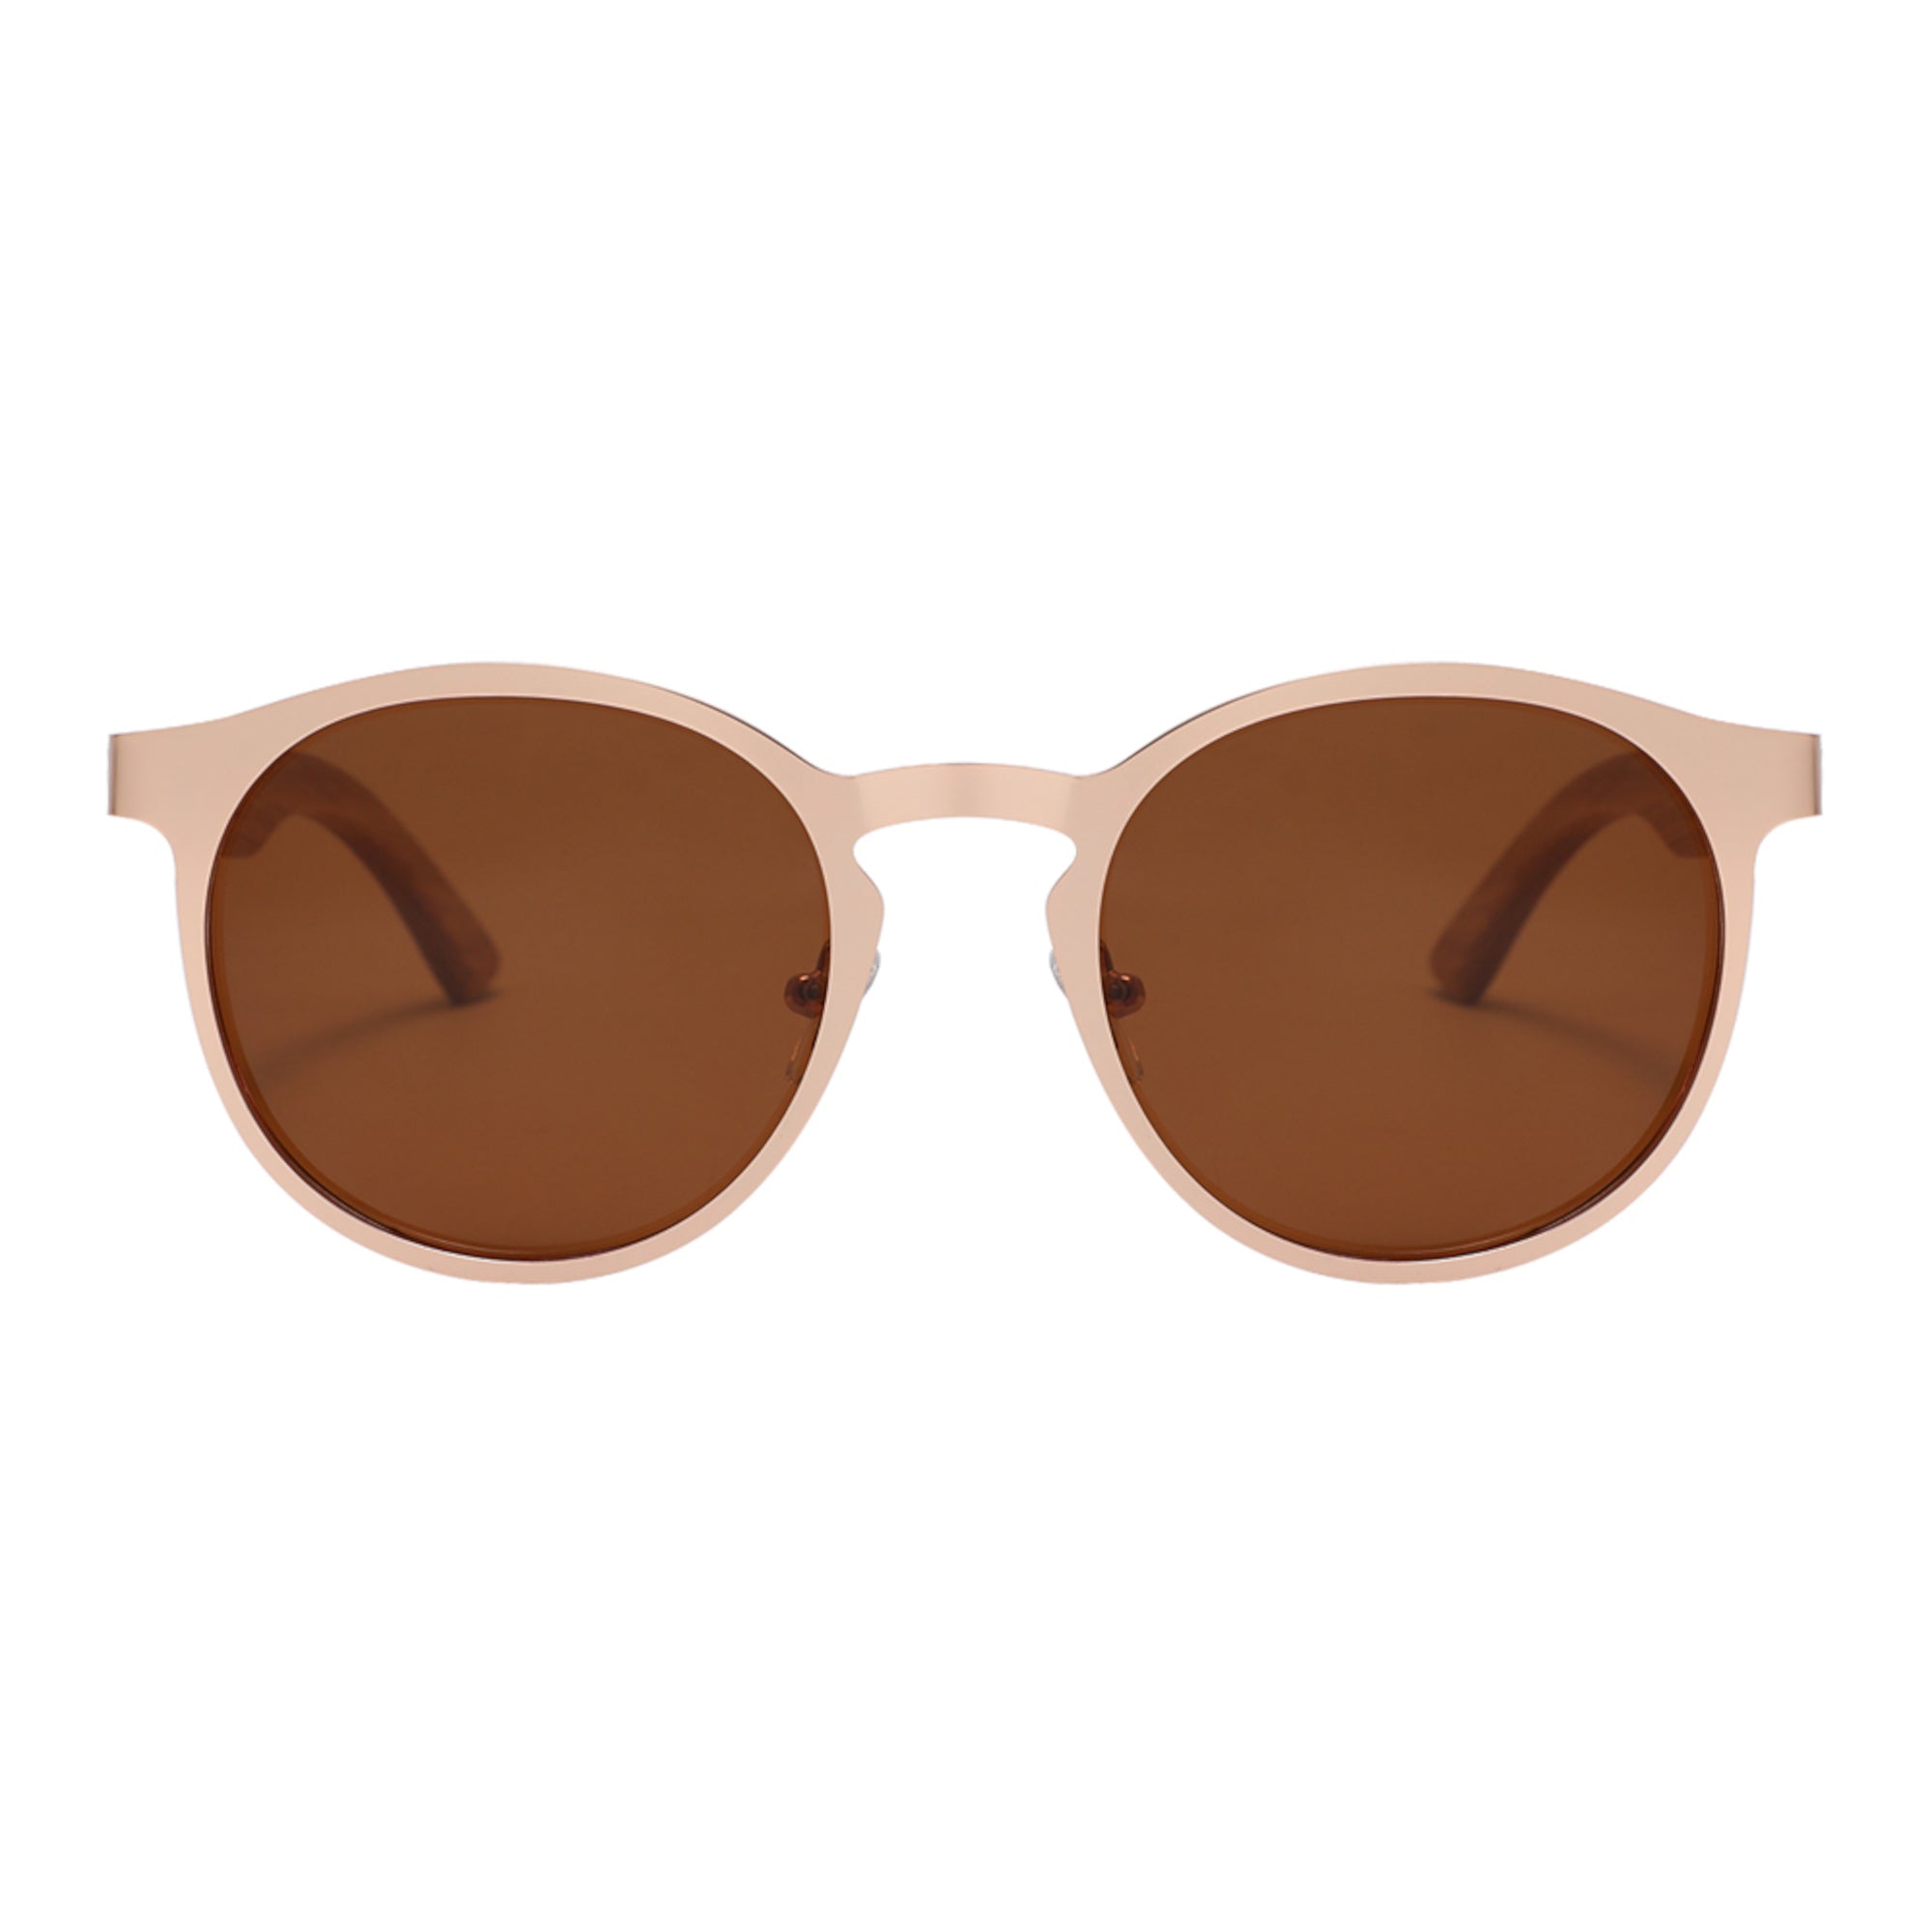 Hybrid Wooden Rounds - Real Wood & Polarized Lenses by WUDN